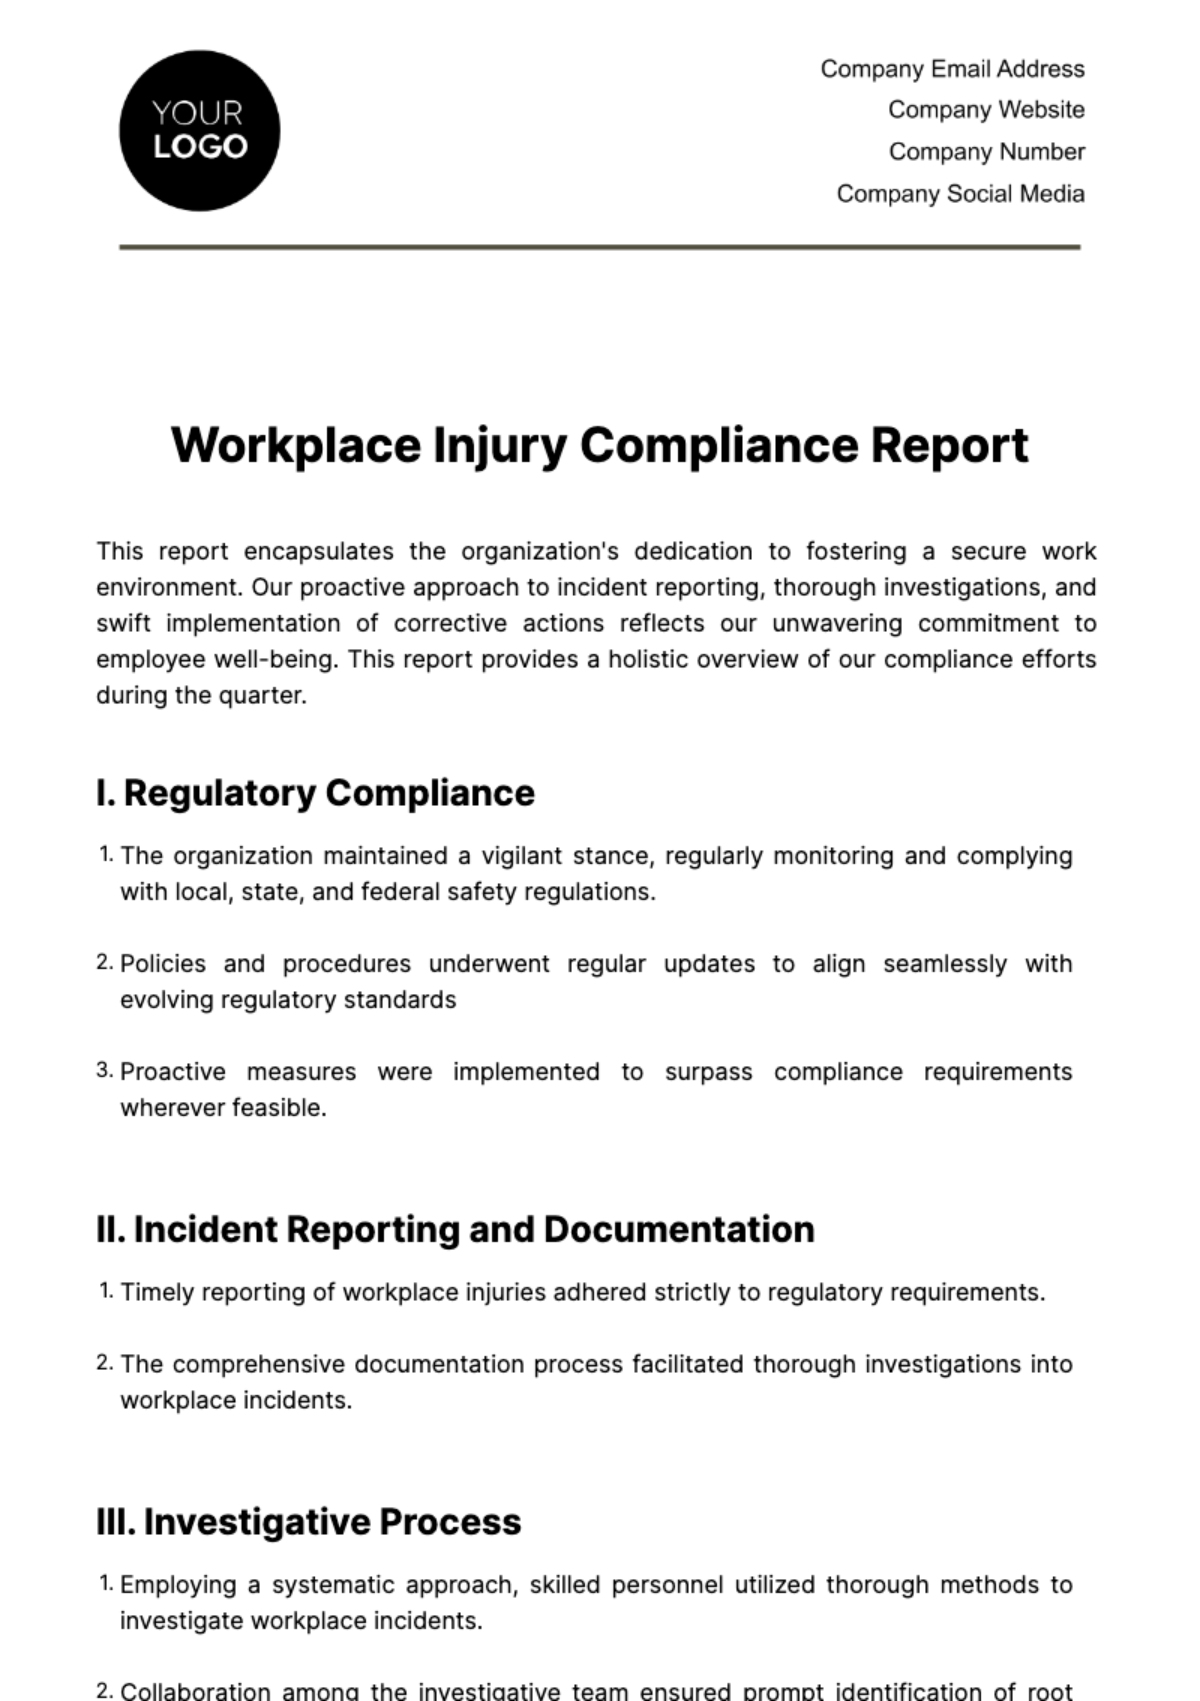 Workplace Injury Compliance Report Template